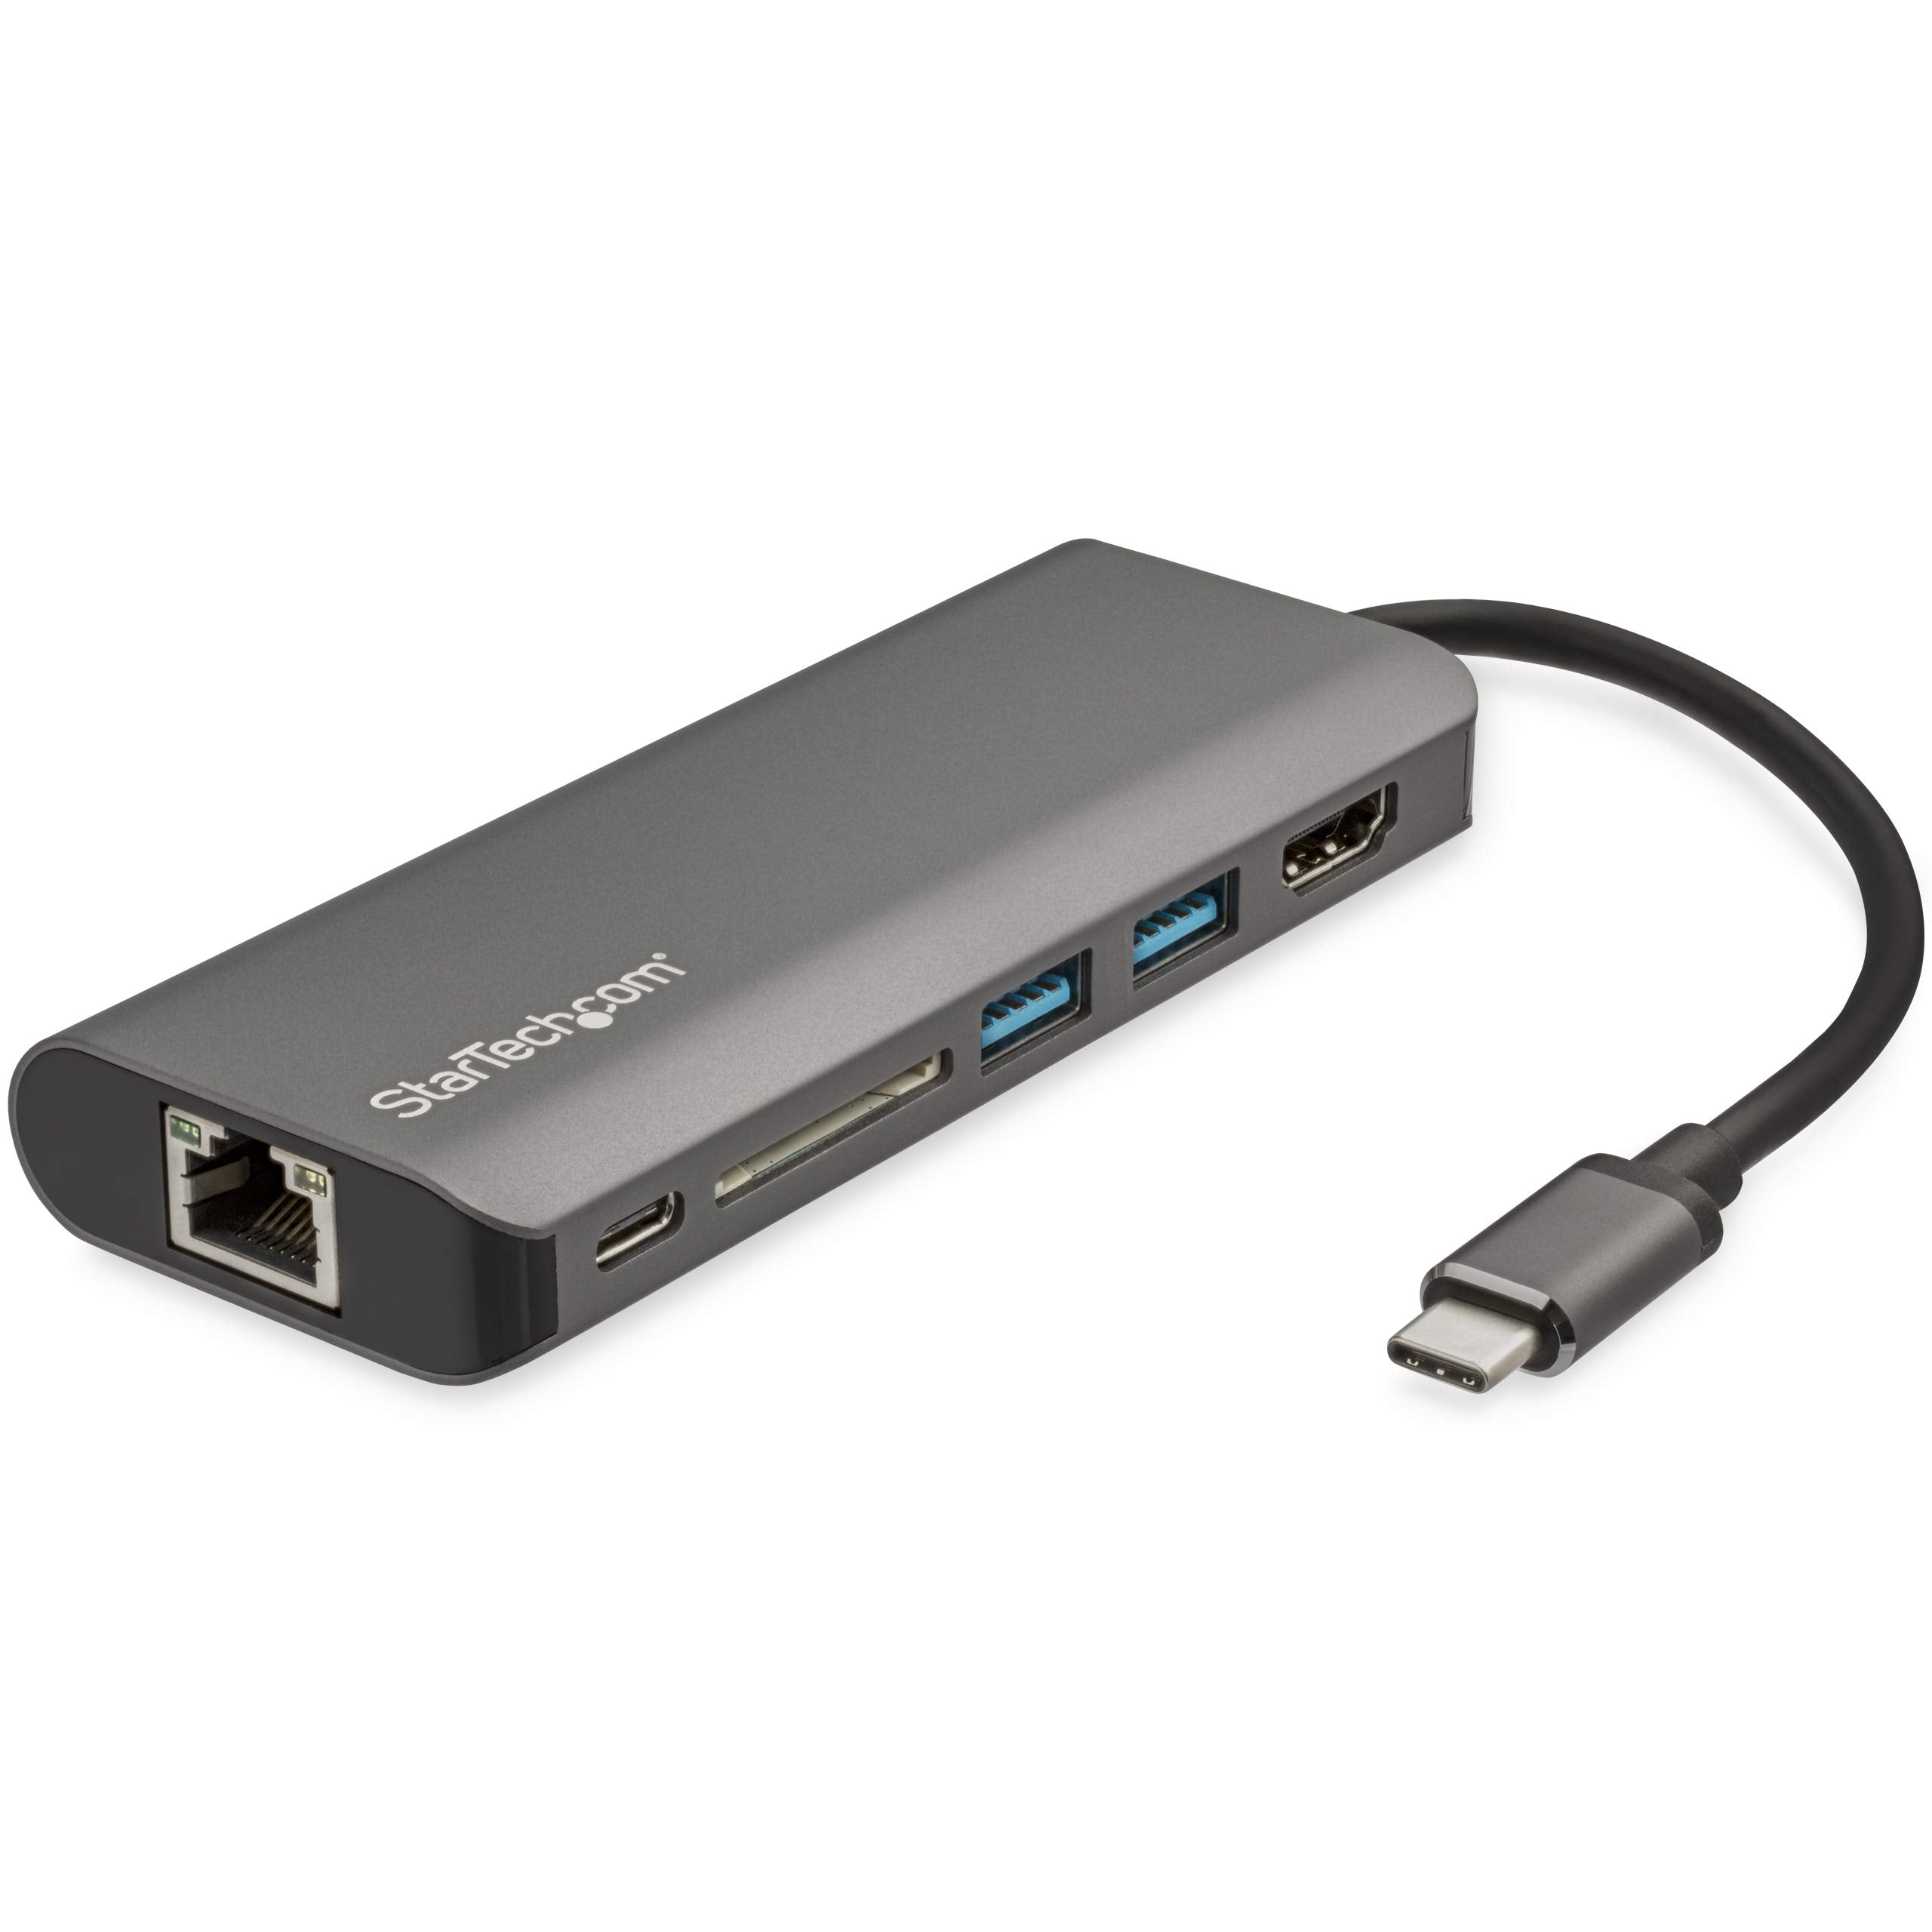 USB-C Multiport Adapter with HDMI - 4K - Mac / Windows - SD Card Reader - USB C to USB 3.0 Hub - 2x USB-A 1x USB-C - 60W PD 3.0